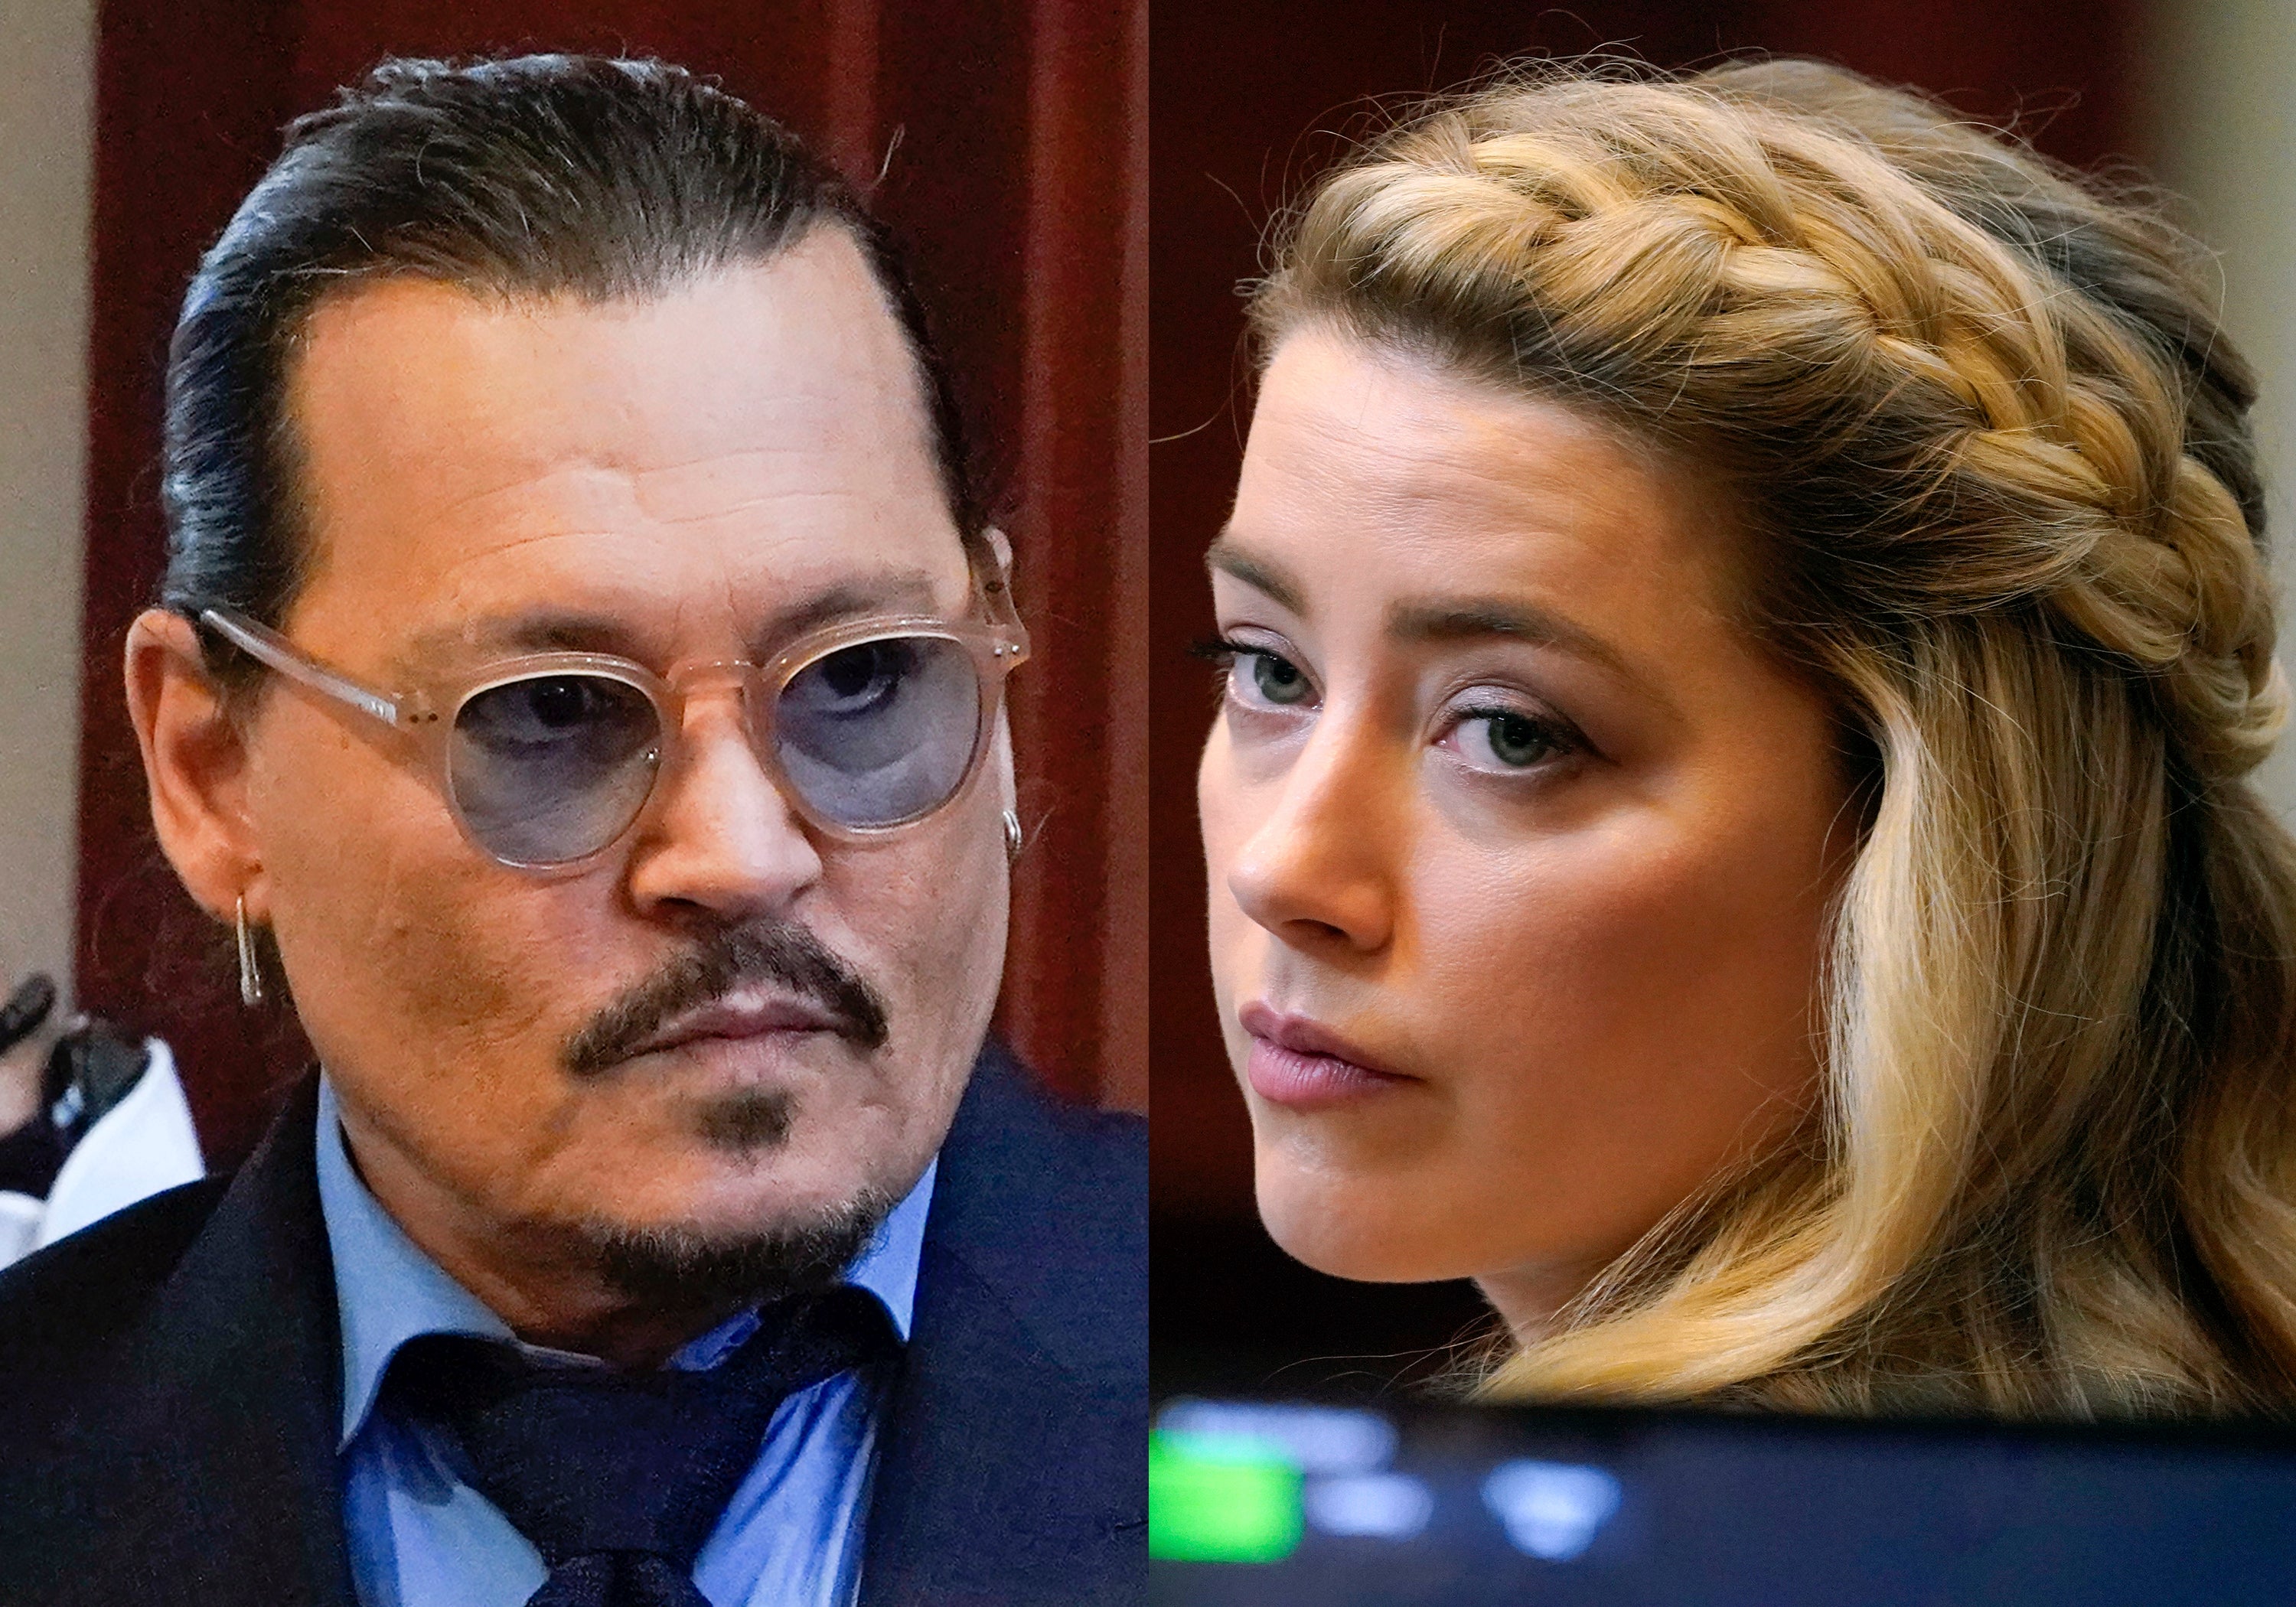 Johnny Depp Vs Amber Heard How Both Actors Each Made Their Case For Being The Victim The